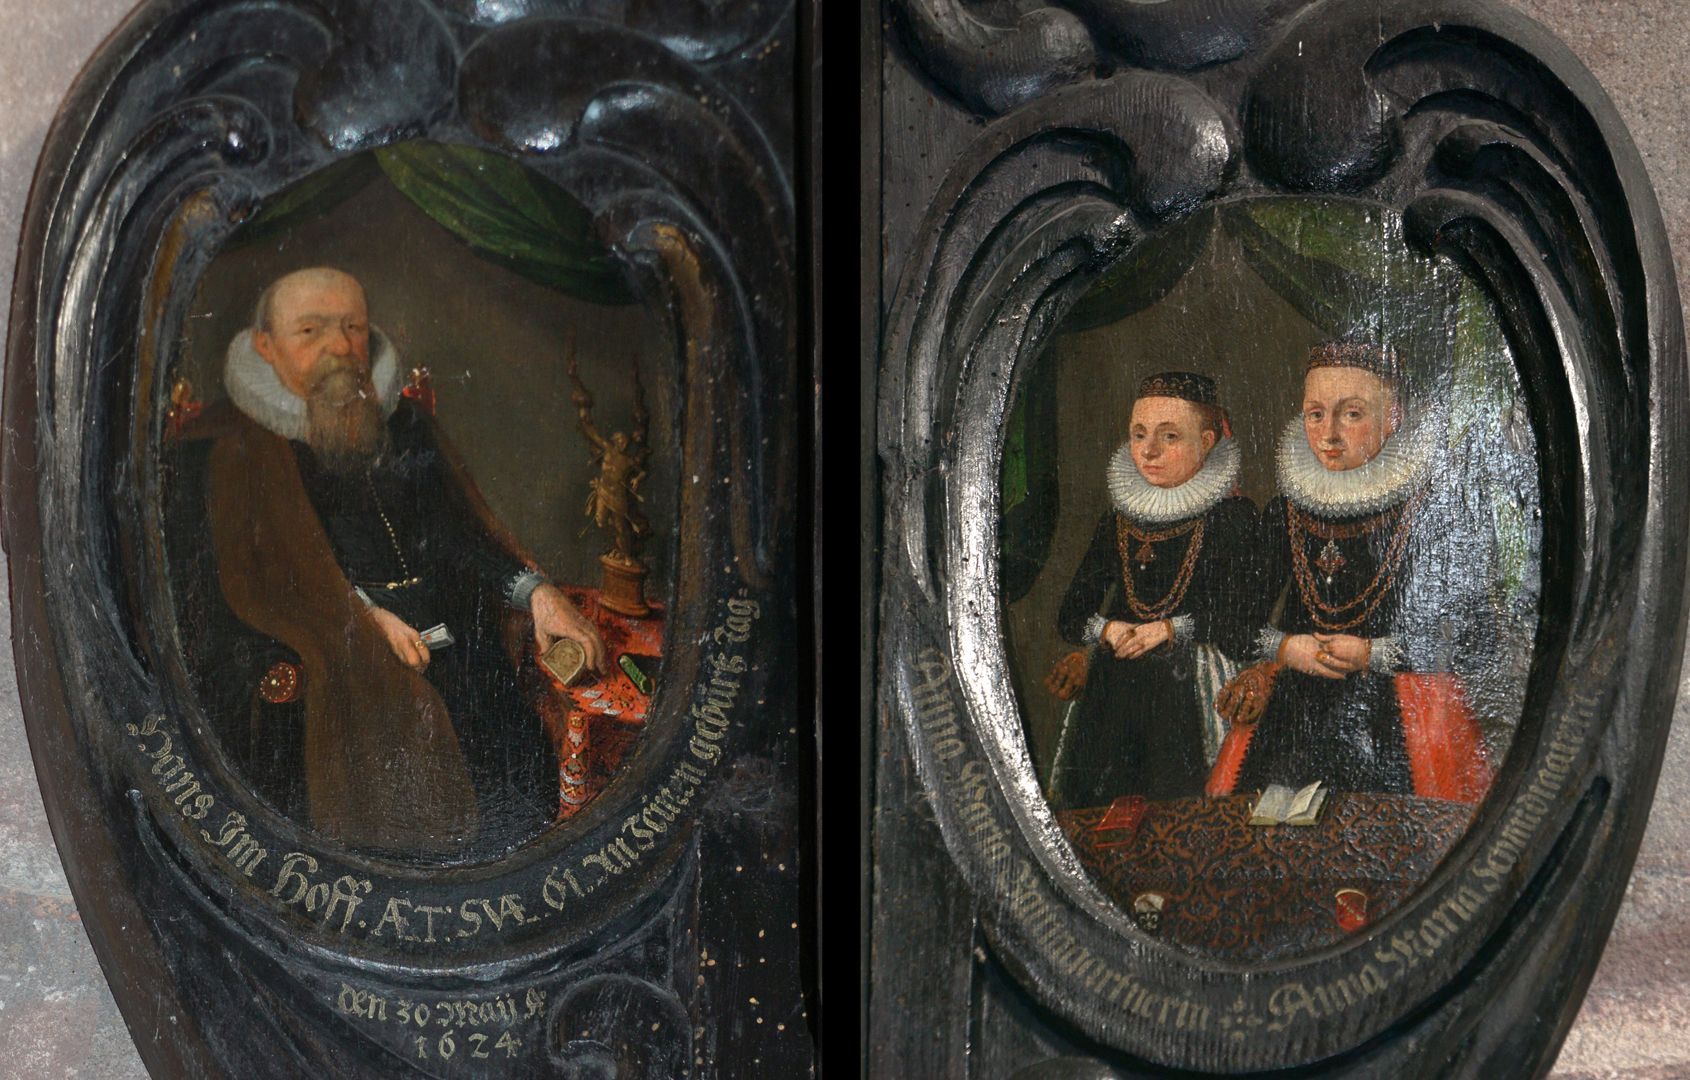 Dürer's foundation plaque Side cartouches: left Hans Imhoff (1563-1629) / right his two wives Anna Maria, née Paumgartner and Anna Maria, née Schmidmayer